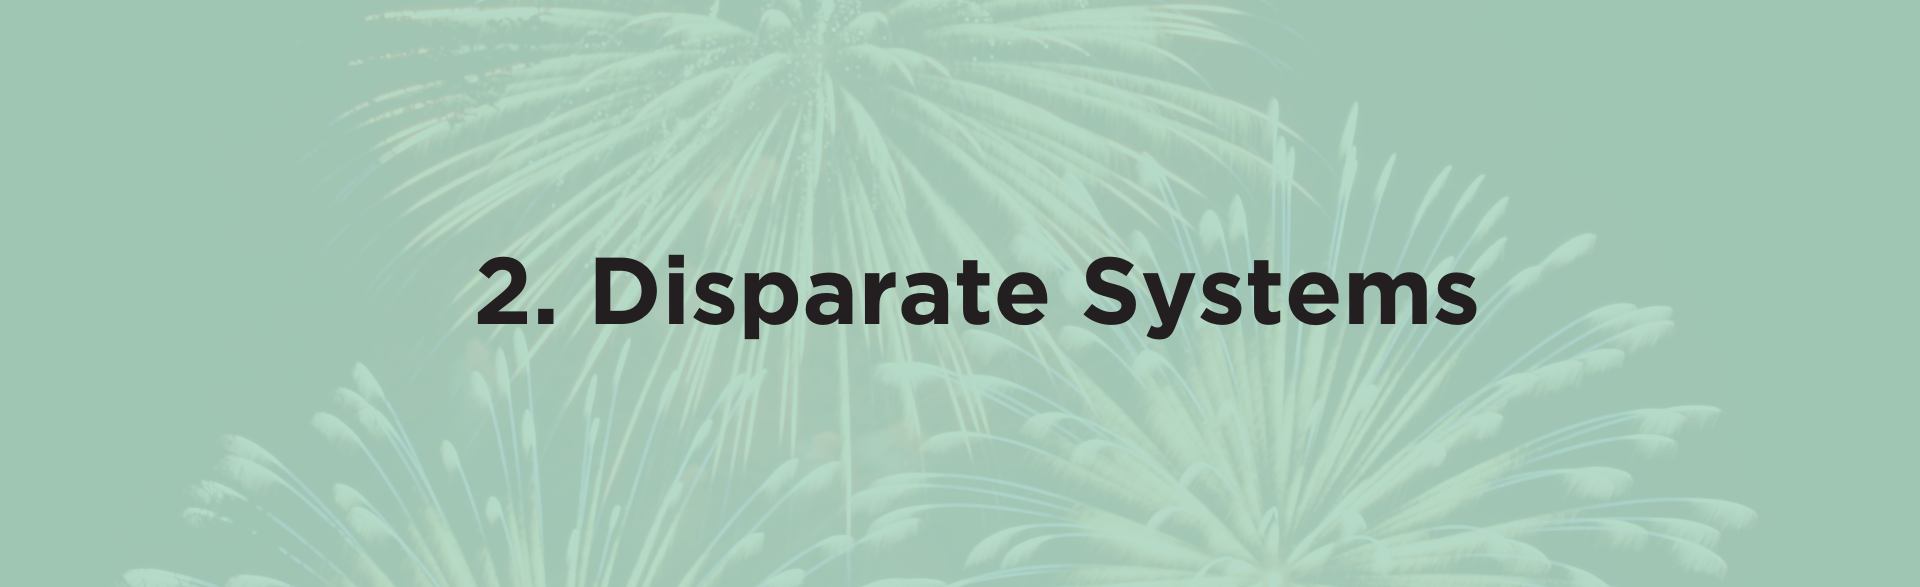 SM2C2.Disparate Systems